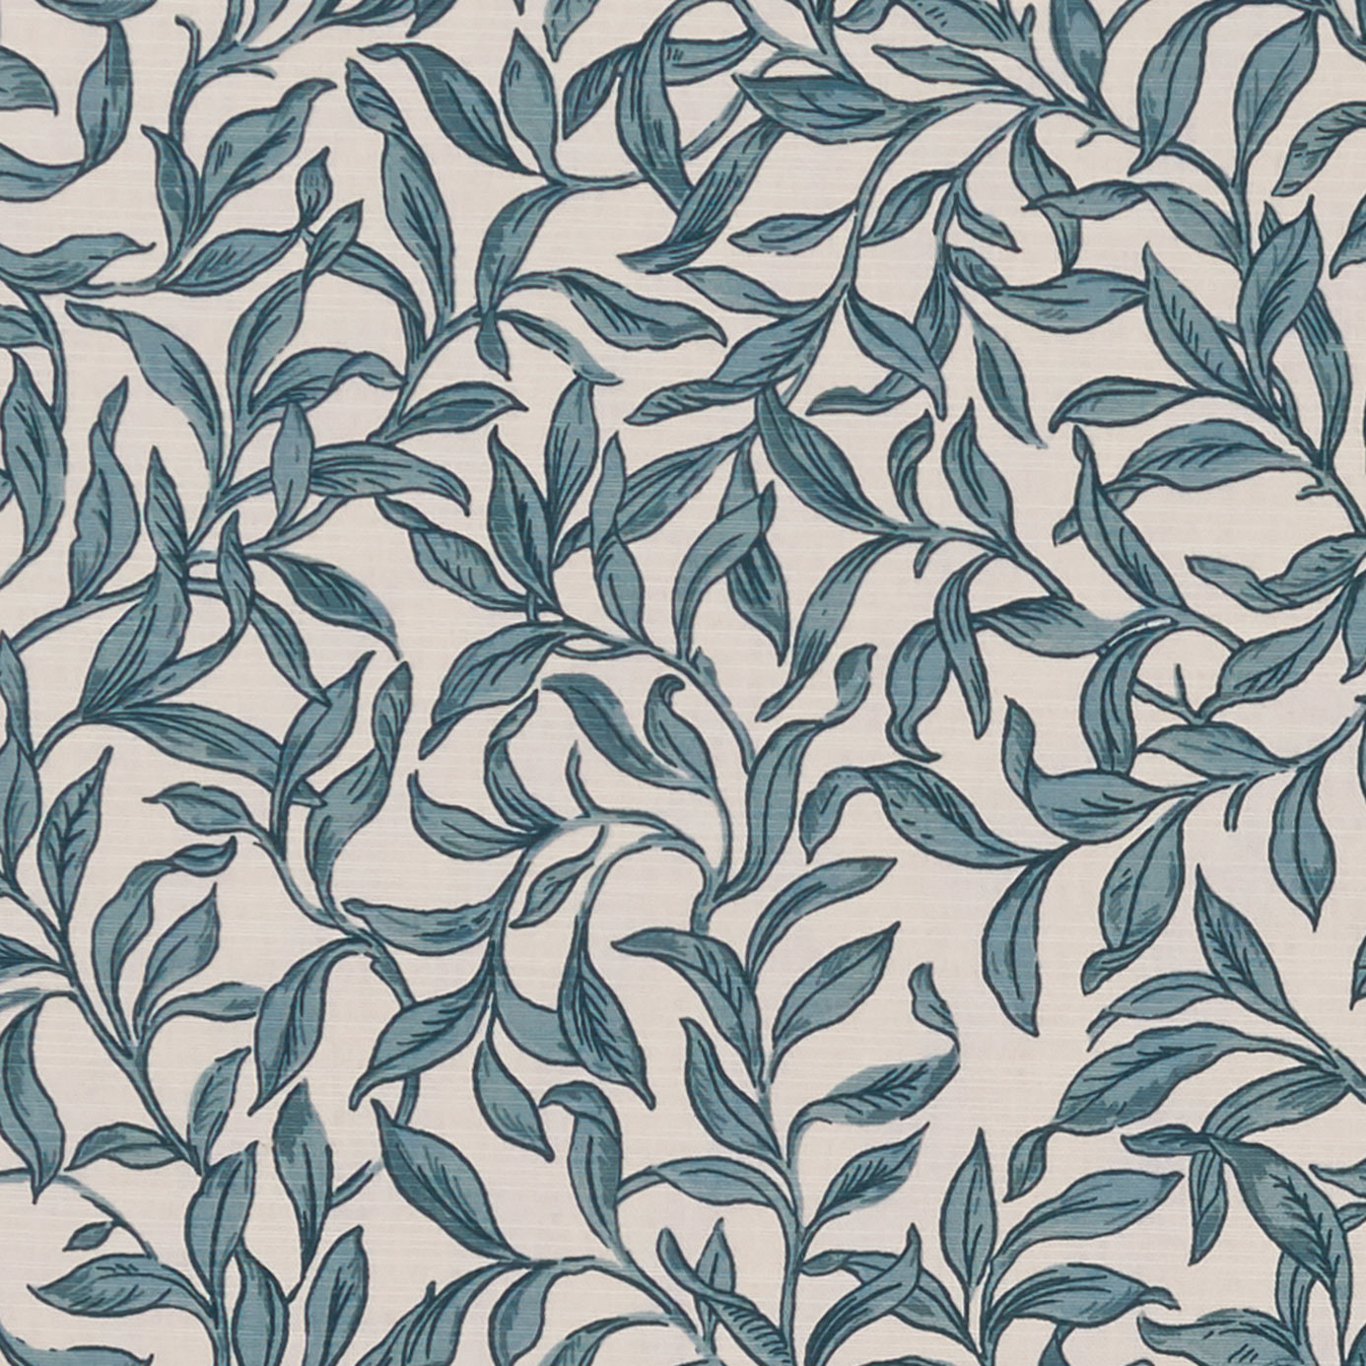 Entwistle Teal Fabric by CNC